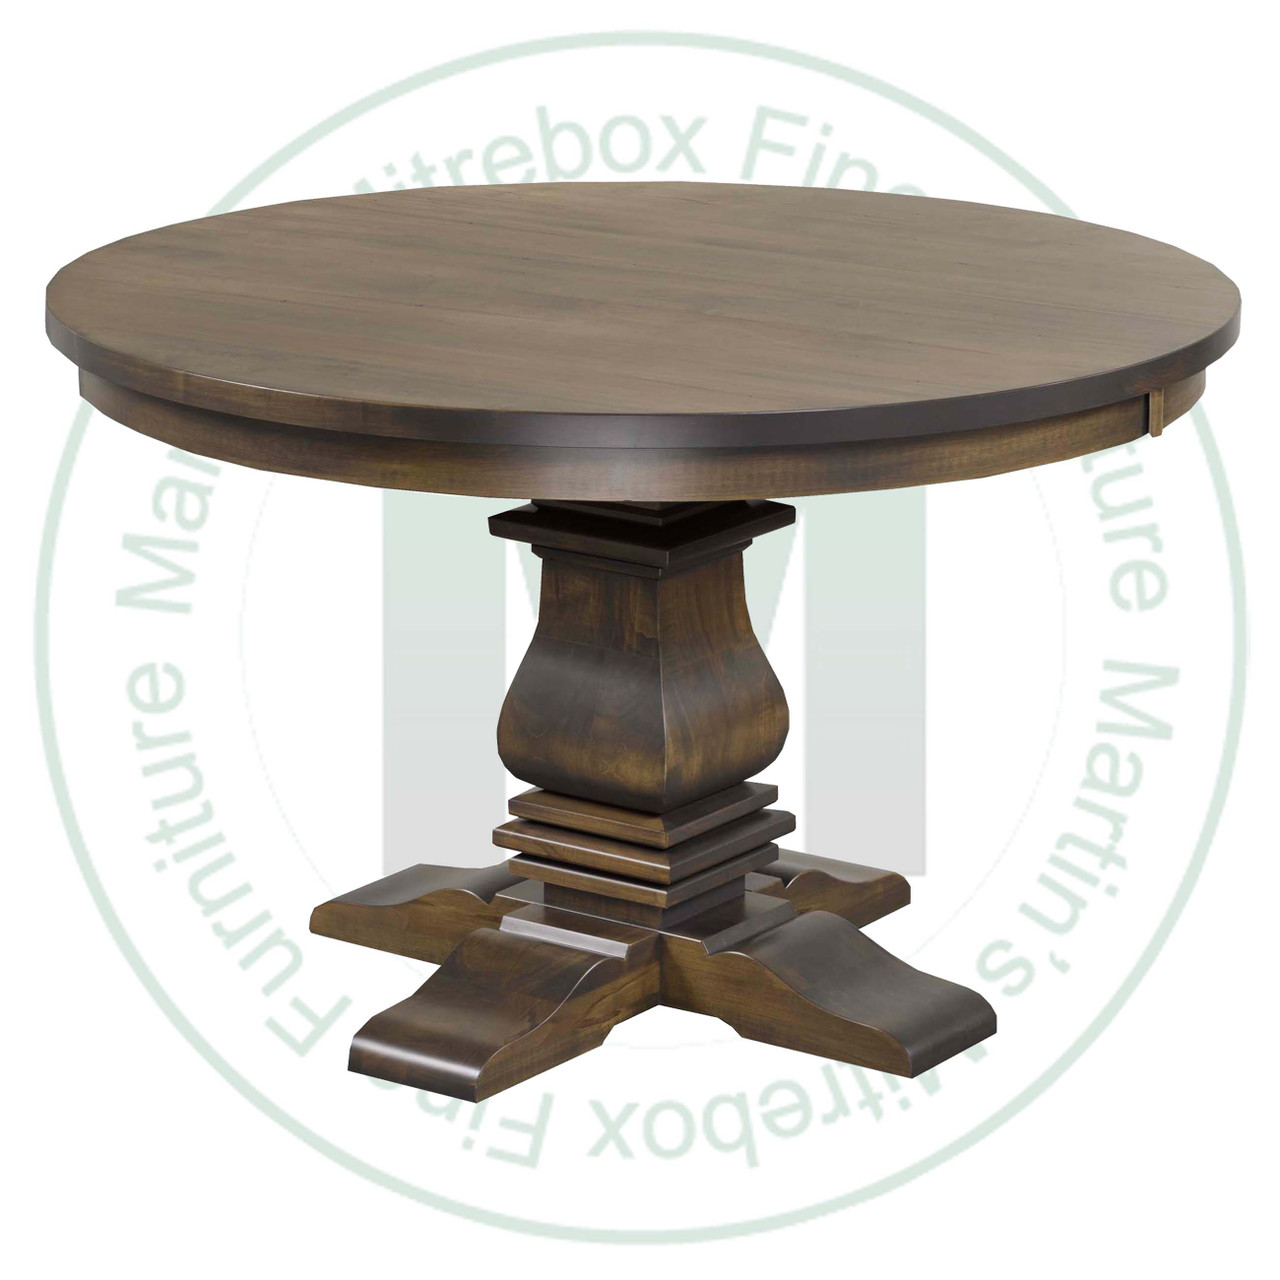 Maple Spartan Collection Single Pedestal Table 42''D x 54''W x 30''H. Table Has 1.25'' Thick Top